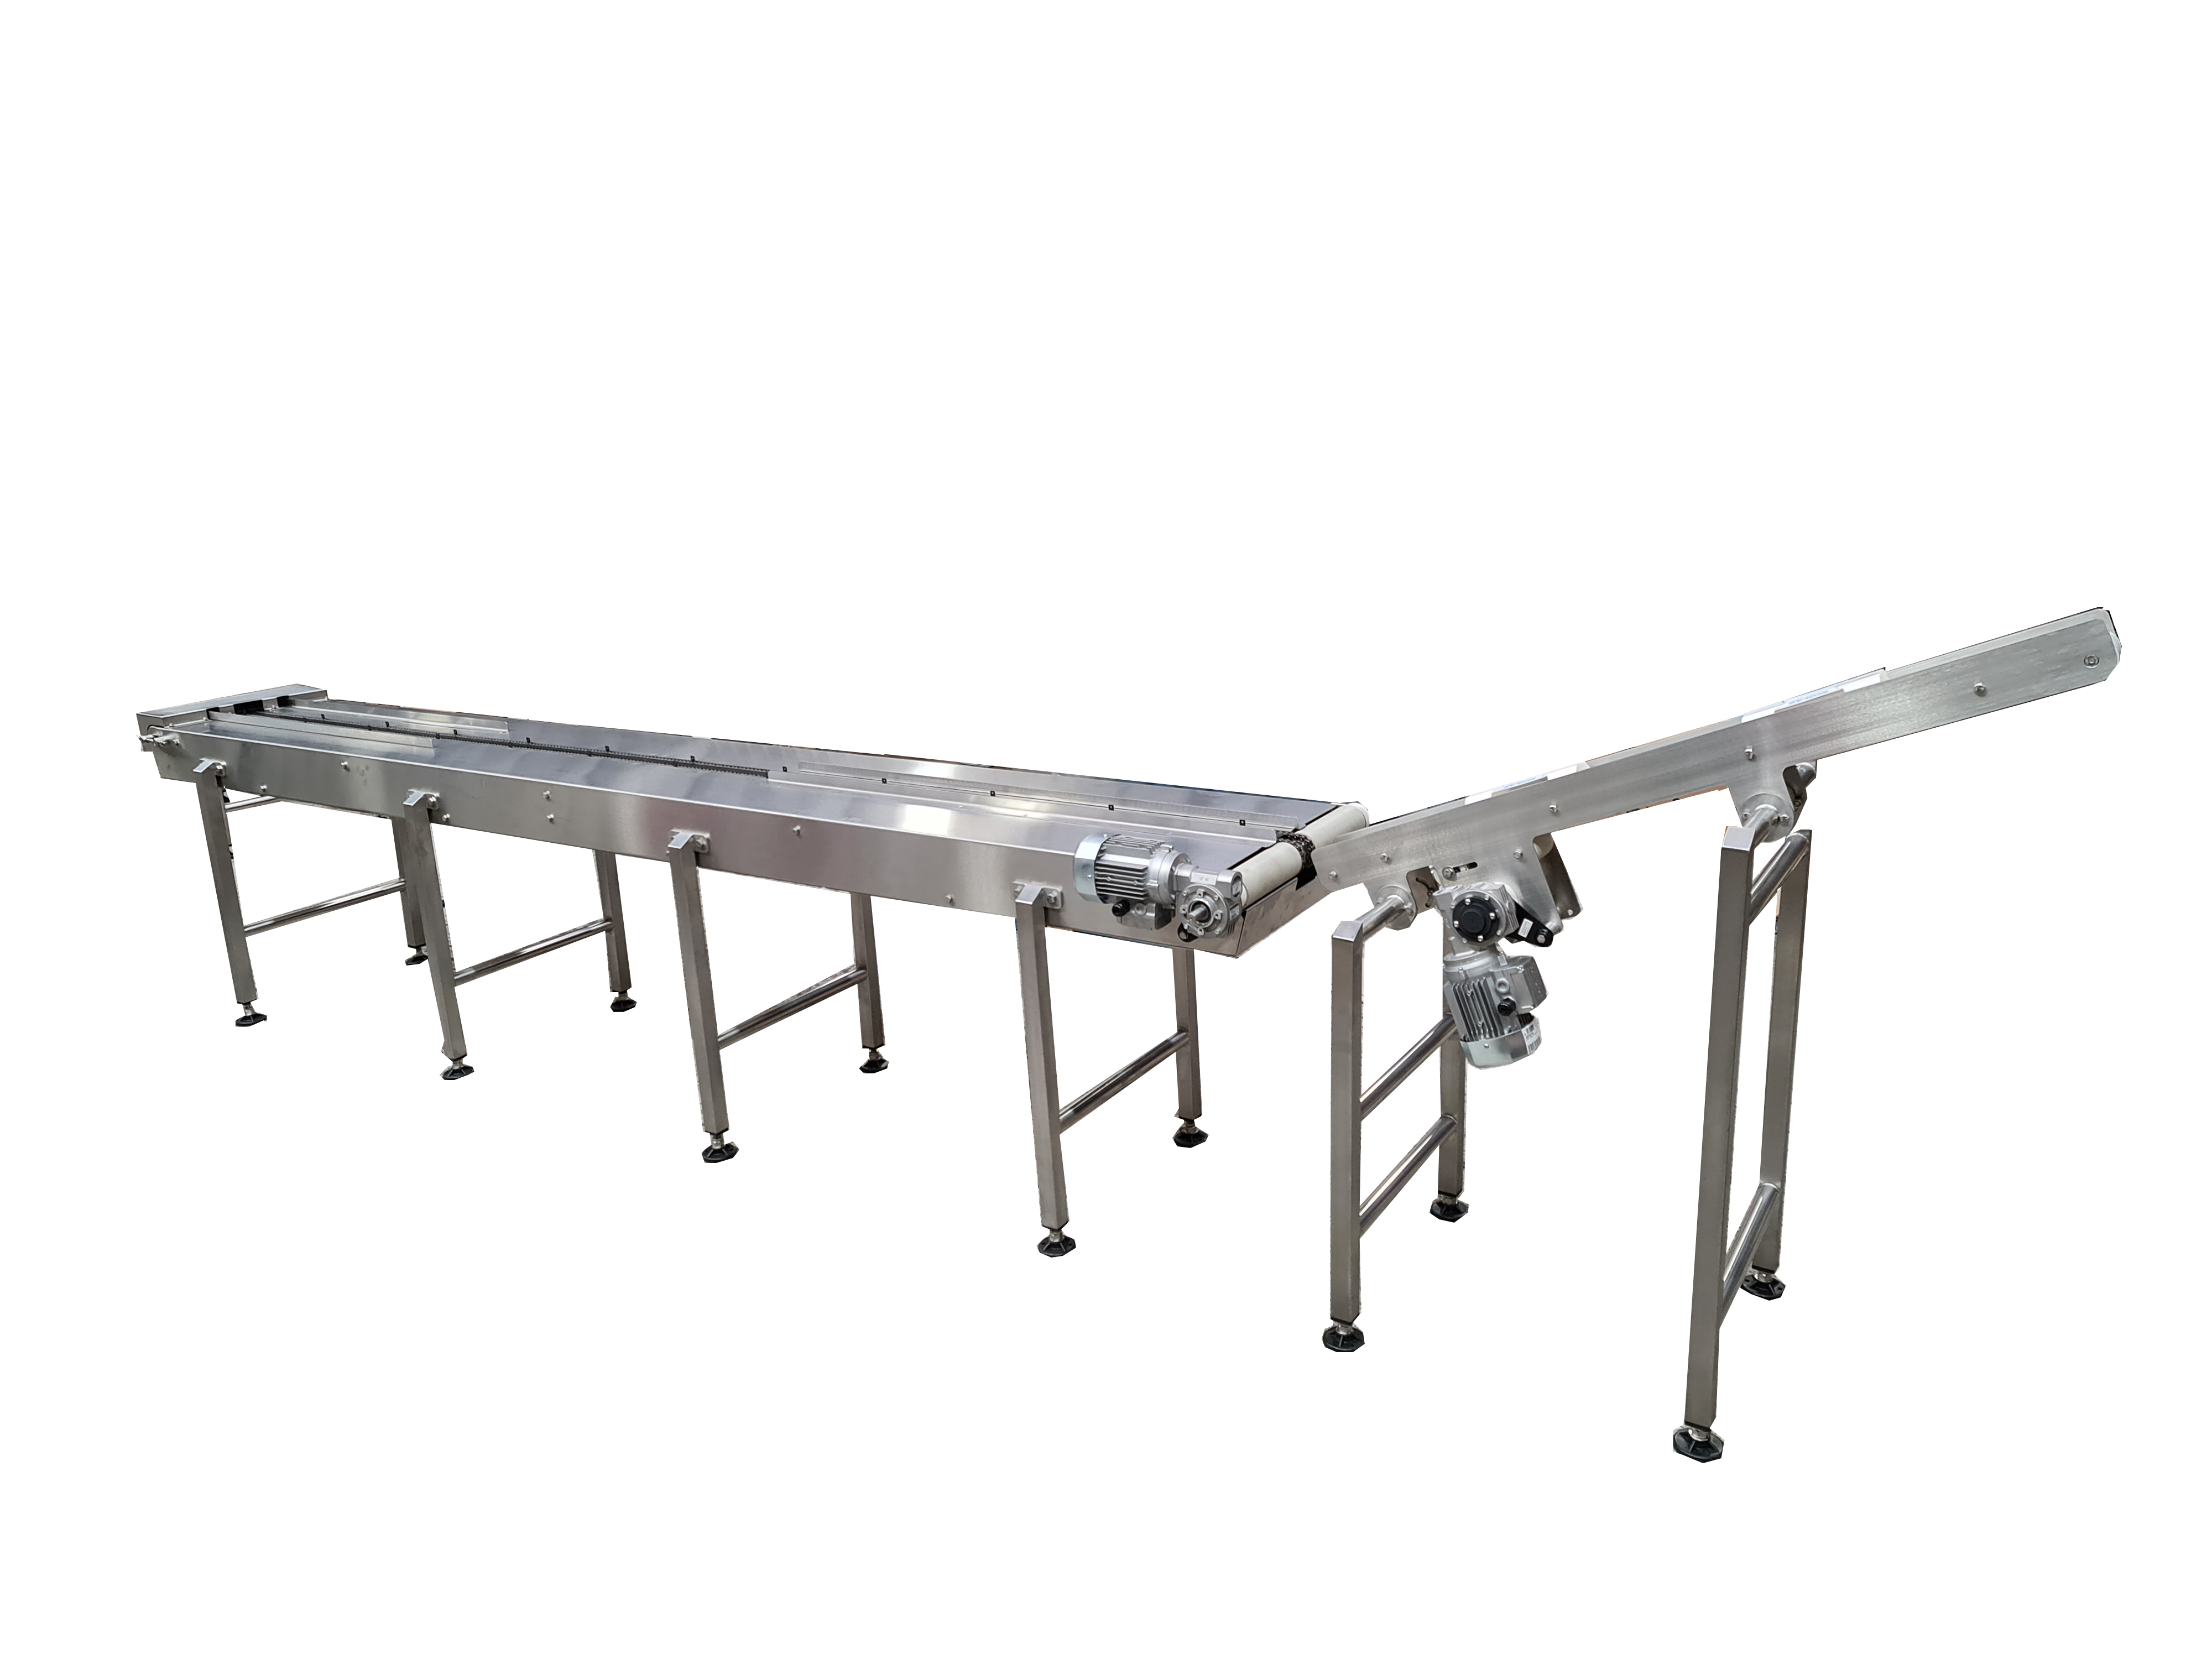 Stainless steel chain peg tab indexing conveyors